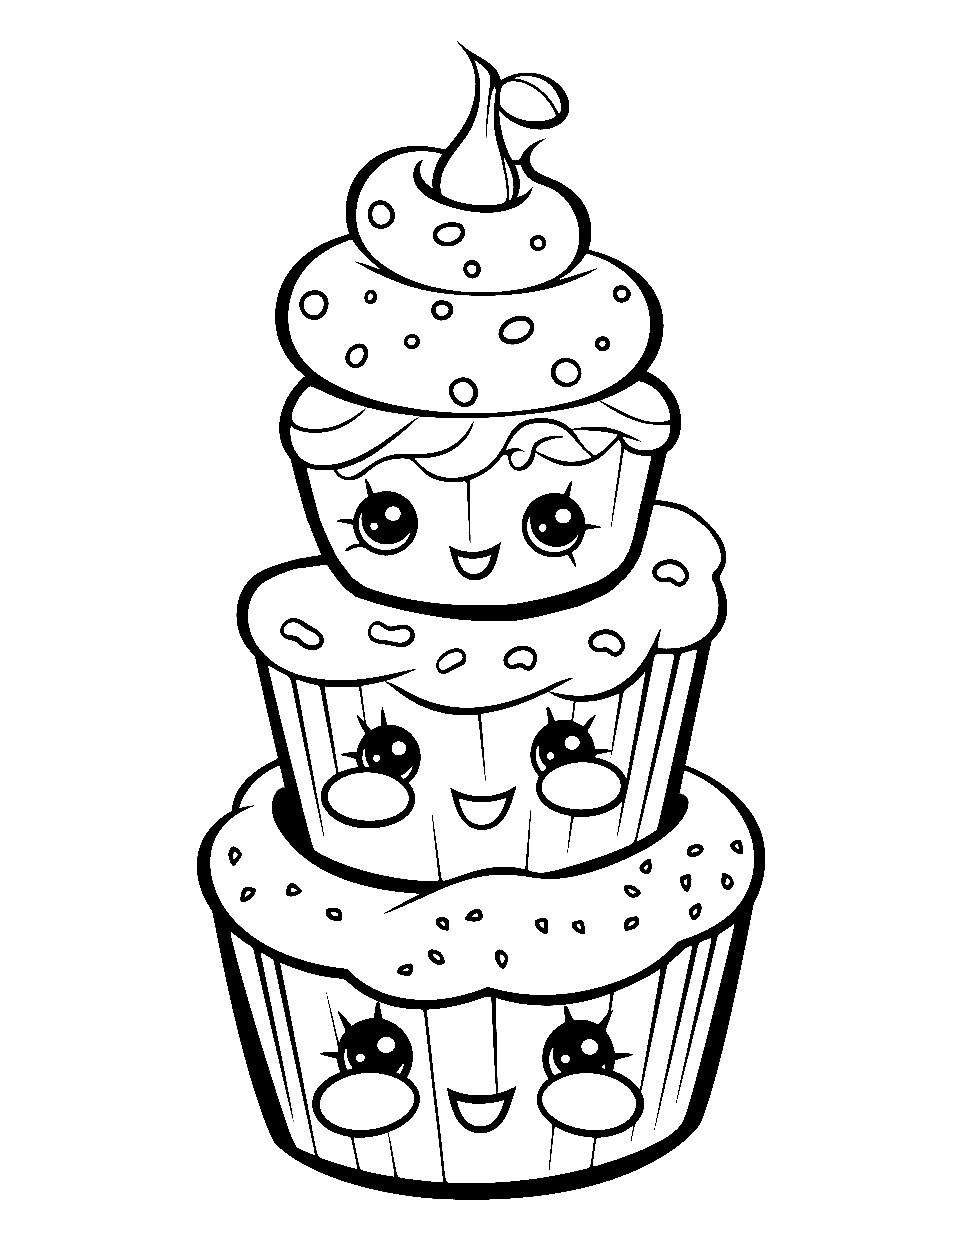 Kawaii Sweet Treats Coloring Book: Cute Dessert, Cupcake, Donut, Candy, Ice Cream, Chocolate, Food, Fruits Easy Coloring Pages for Toddler Girls